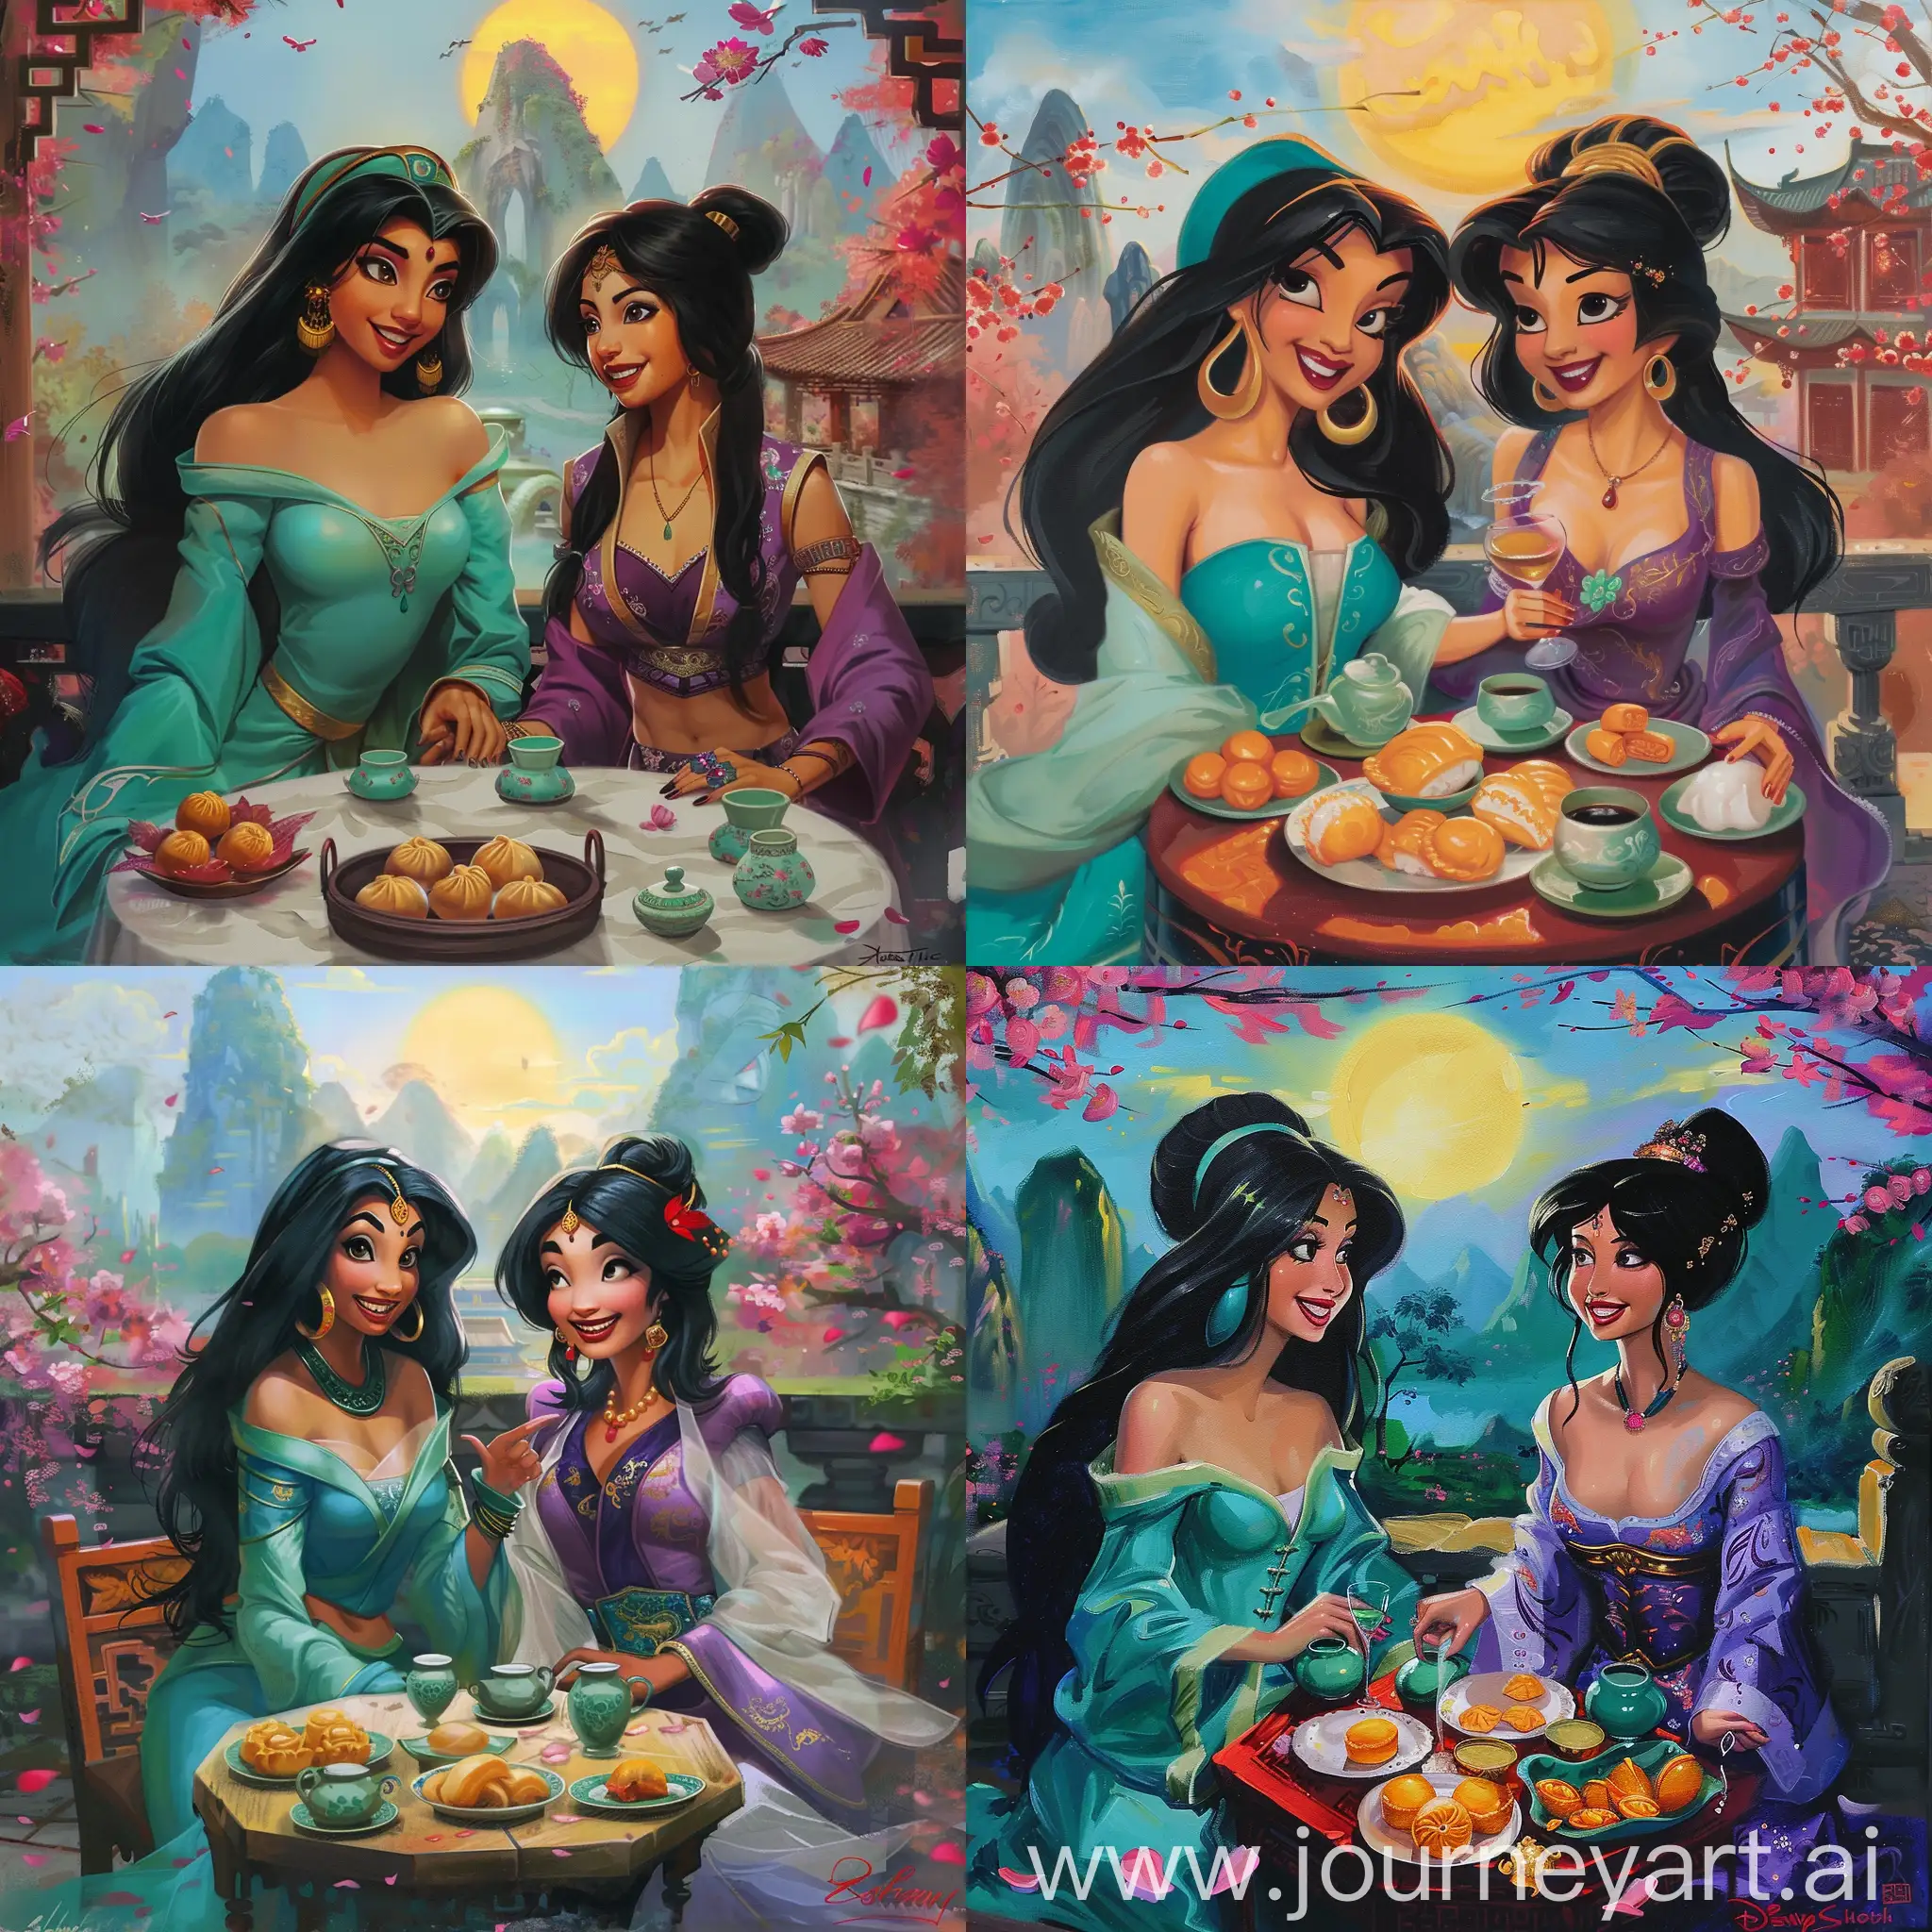 painting mode:

from Disney cartoon:

there is a Disney Beautiful Arabian Princess Jasmine, with black long hair, she wears deep green and turquoise colors Chinese Princess Hanfu robe.

a Disney Beautiful Indian lady Shanti, from the Jungle Book cartoon, with black two brides hair, she wears purple and rose colors Chinese Princess Hanfu.

they are sitting together, next to each other,

on the dinner table there are delicious Chinese dim sums and jade porcelain cups of wine.

they are inside a splendid Chinese Summer Palace's garden, with rose peach blossom,

Guilin mountain as background,

a yellow sun is smiling in blue sky,